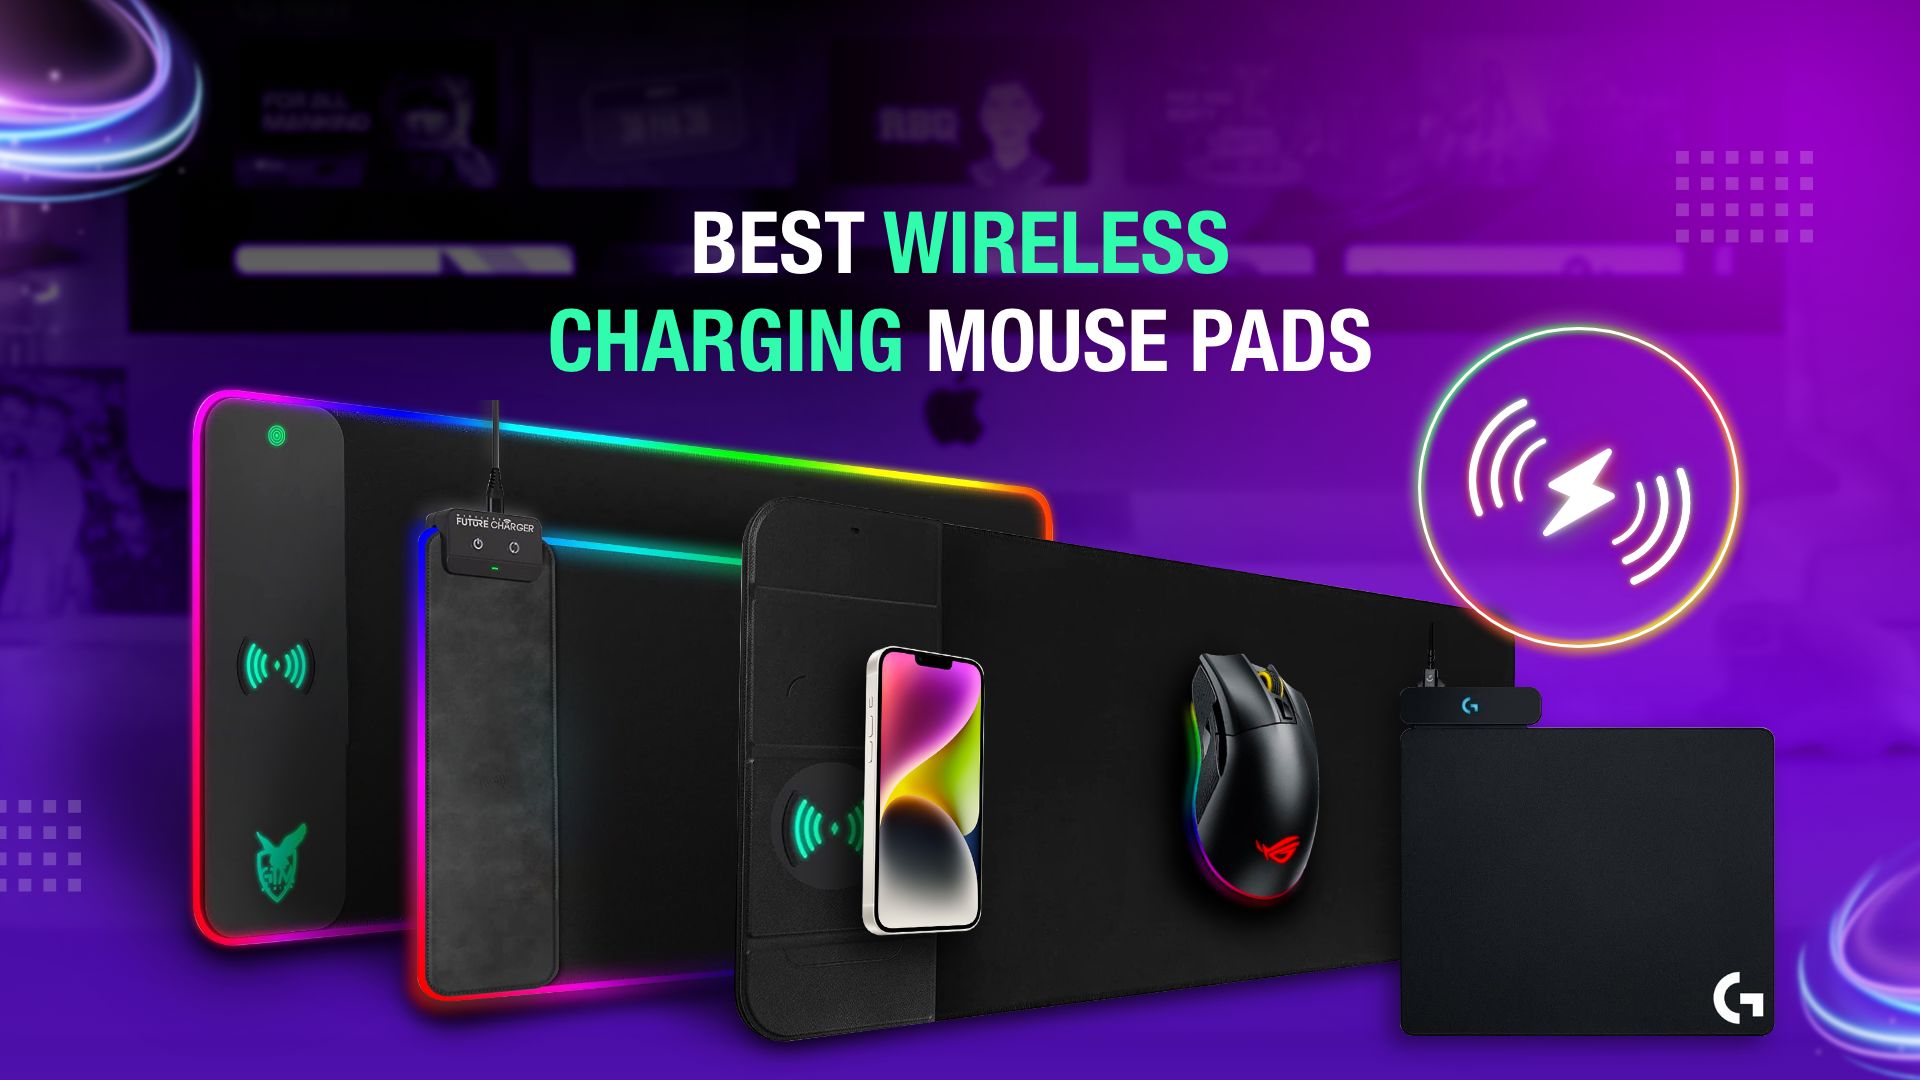 12 Best Wireless Charging Mouse Pads in 2022